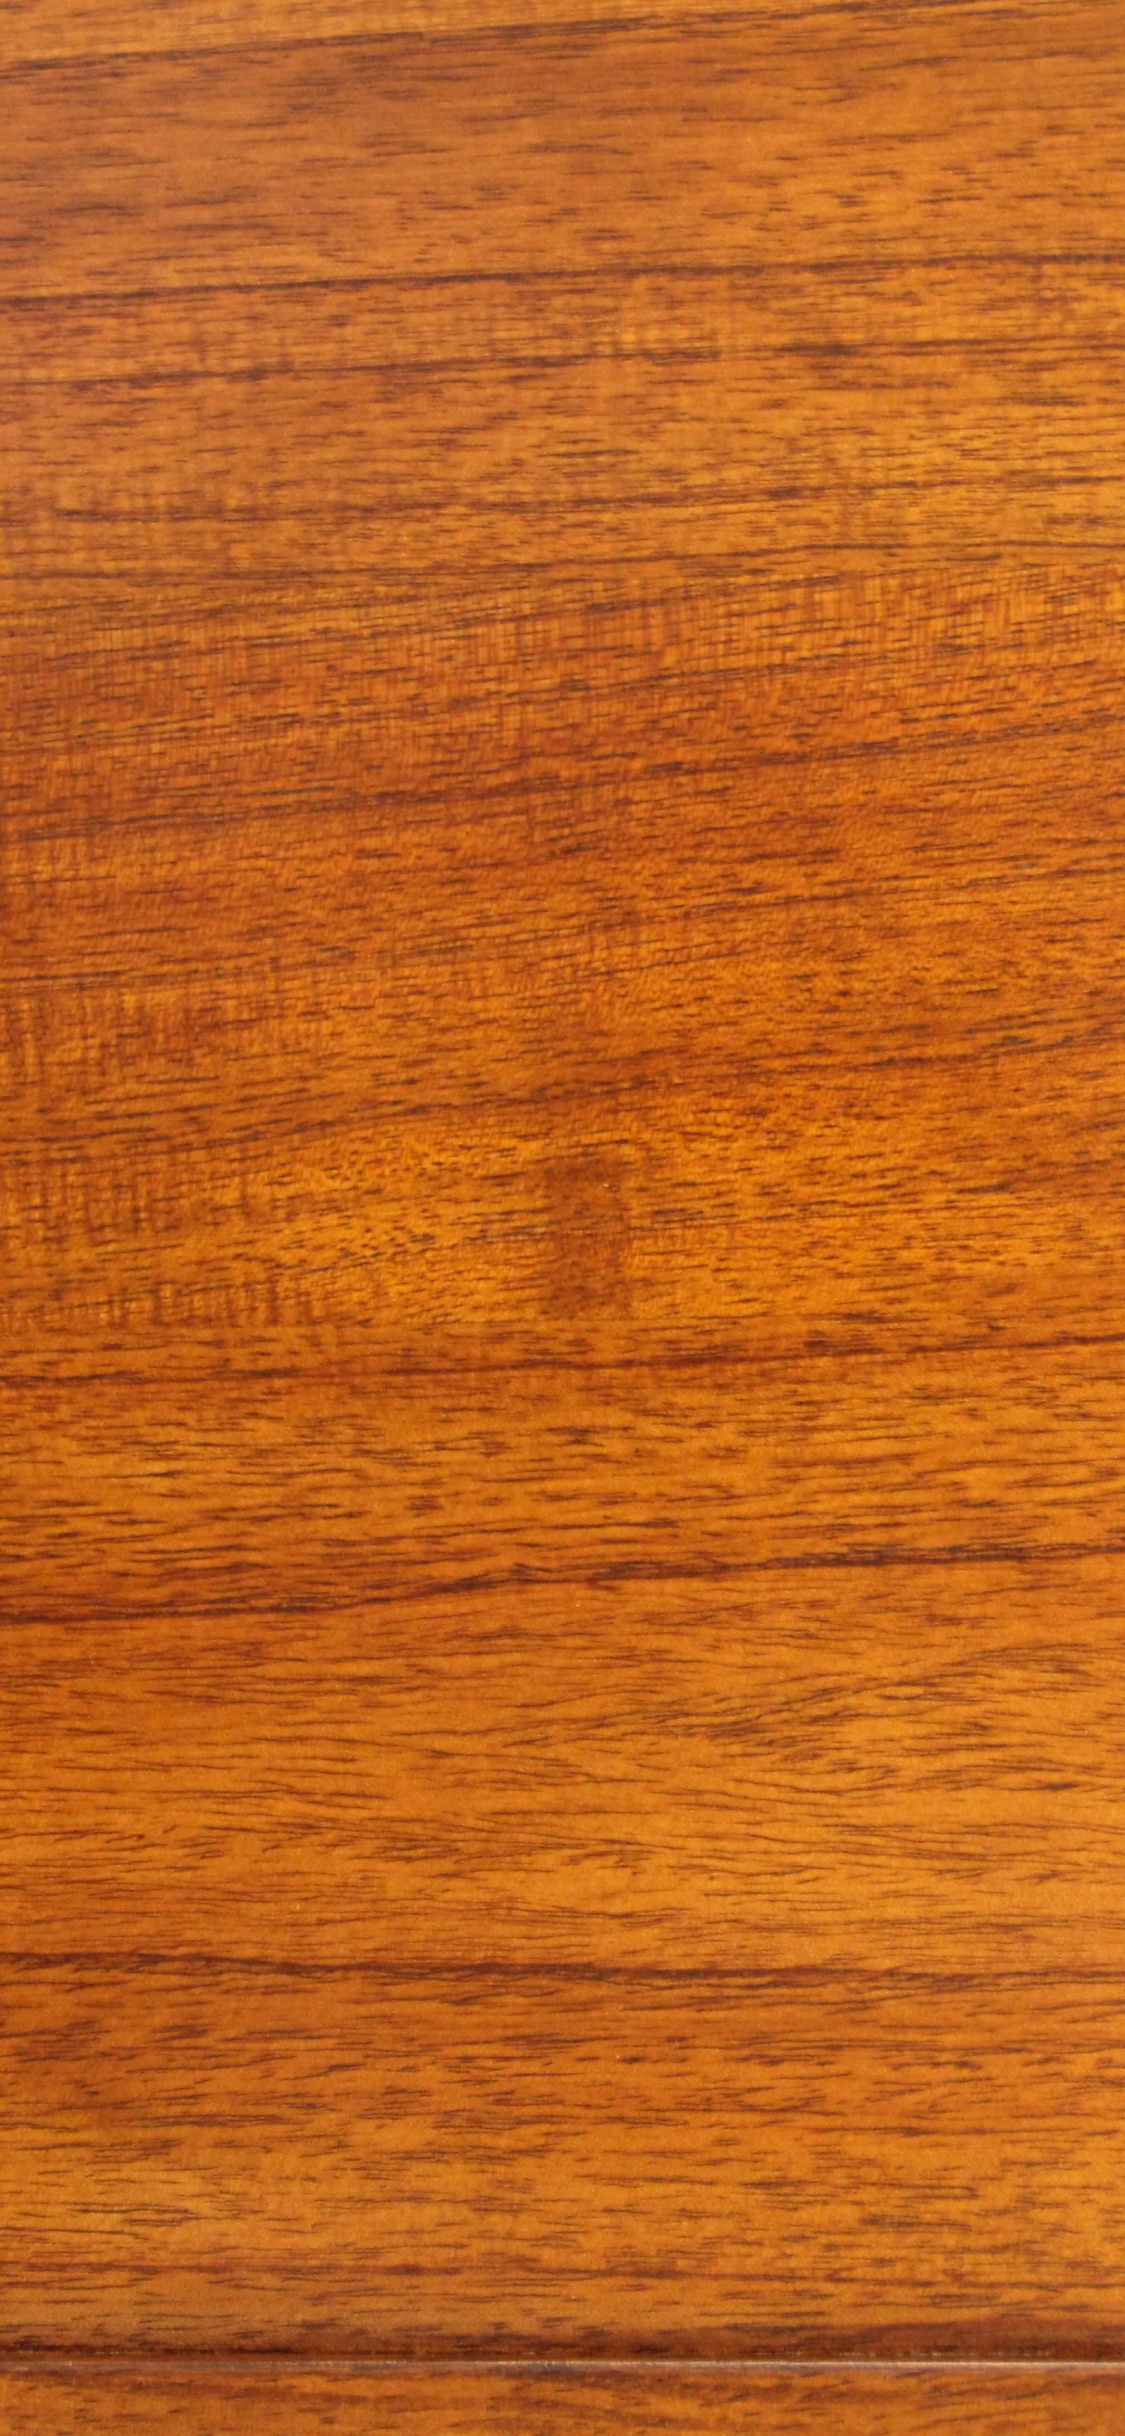 Brown Wooden Table With White Paper. Wallpaper in 1125x2436 Resolution